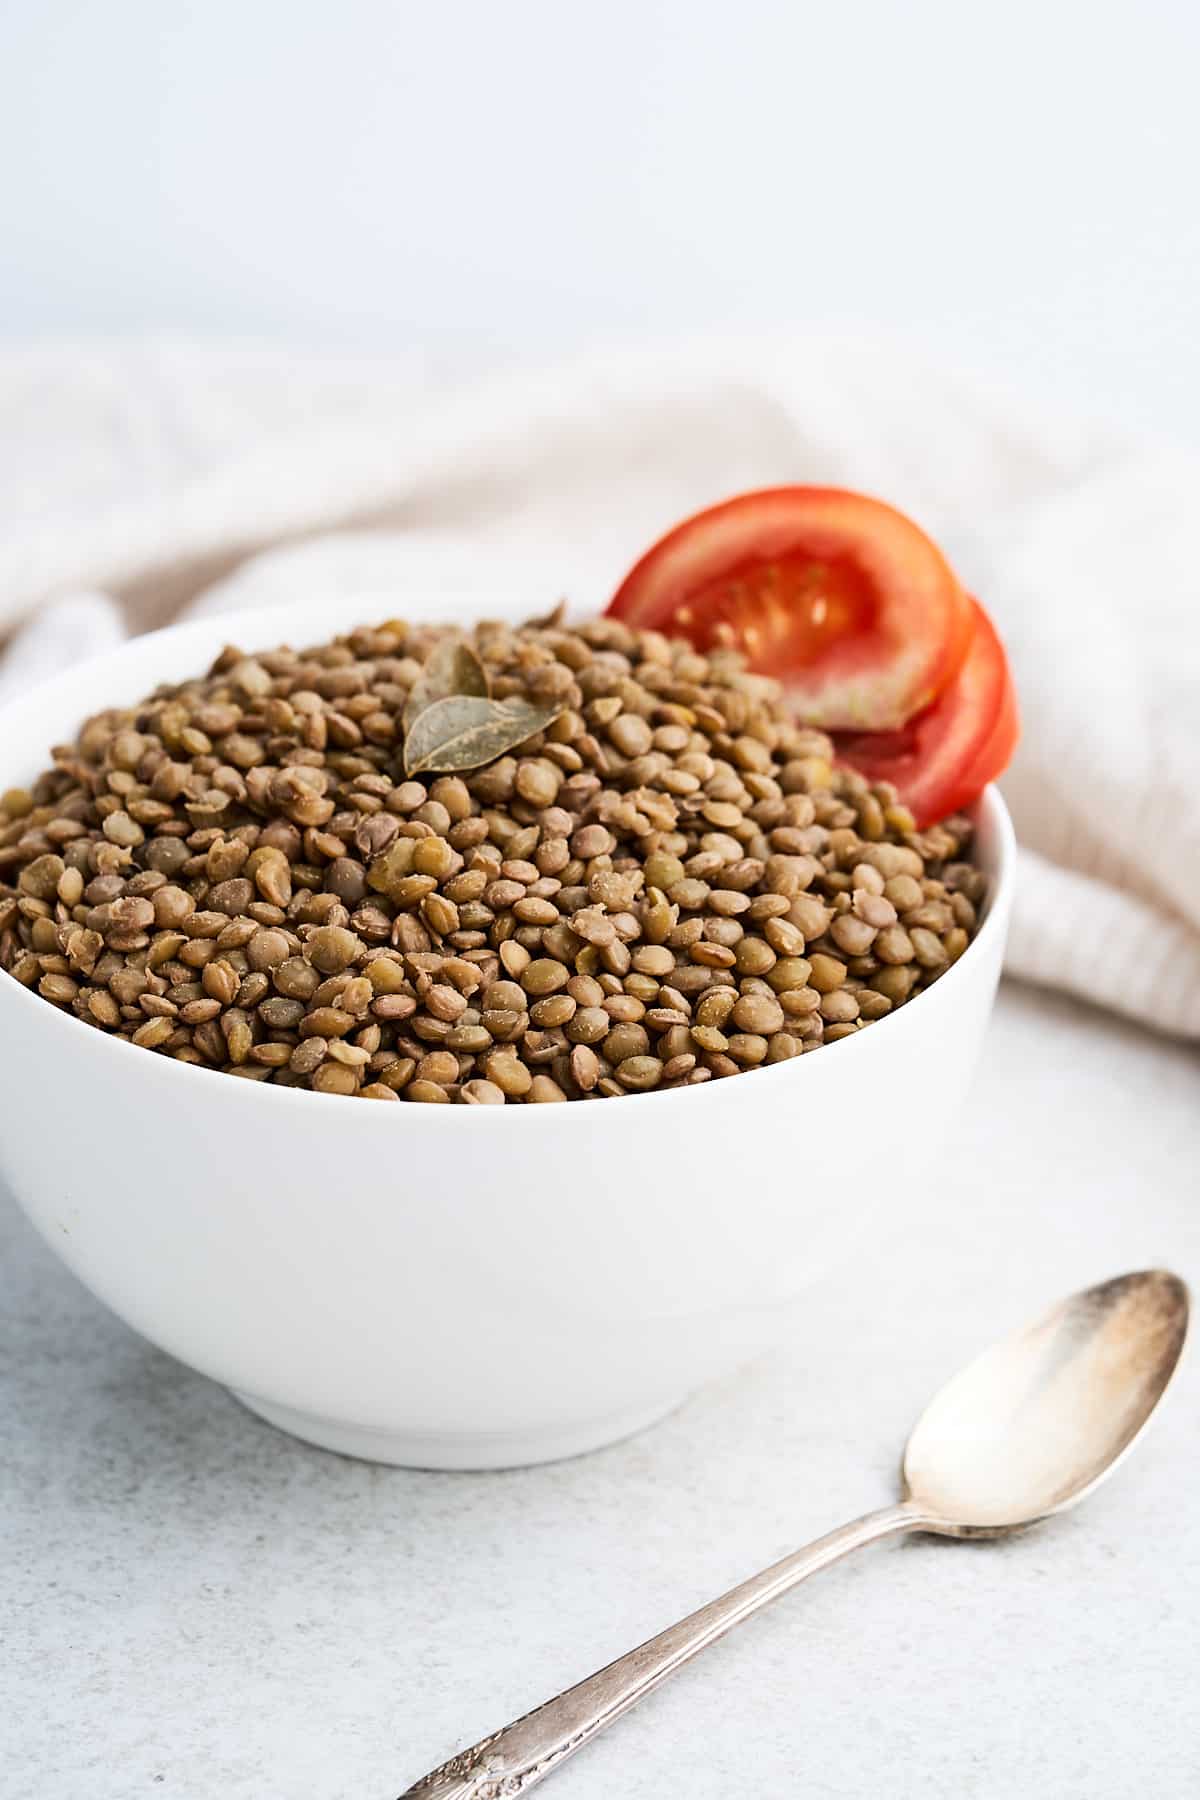 How to cook lentils.